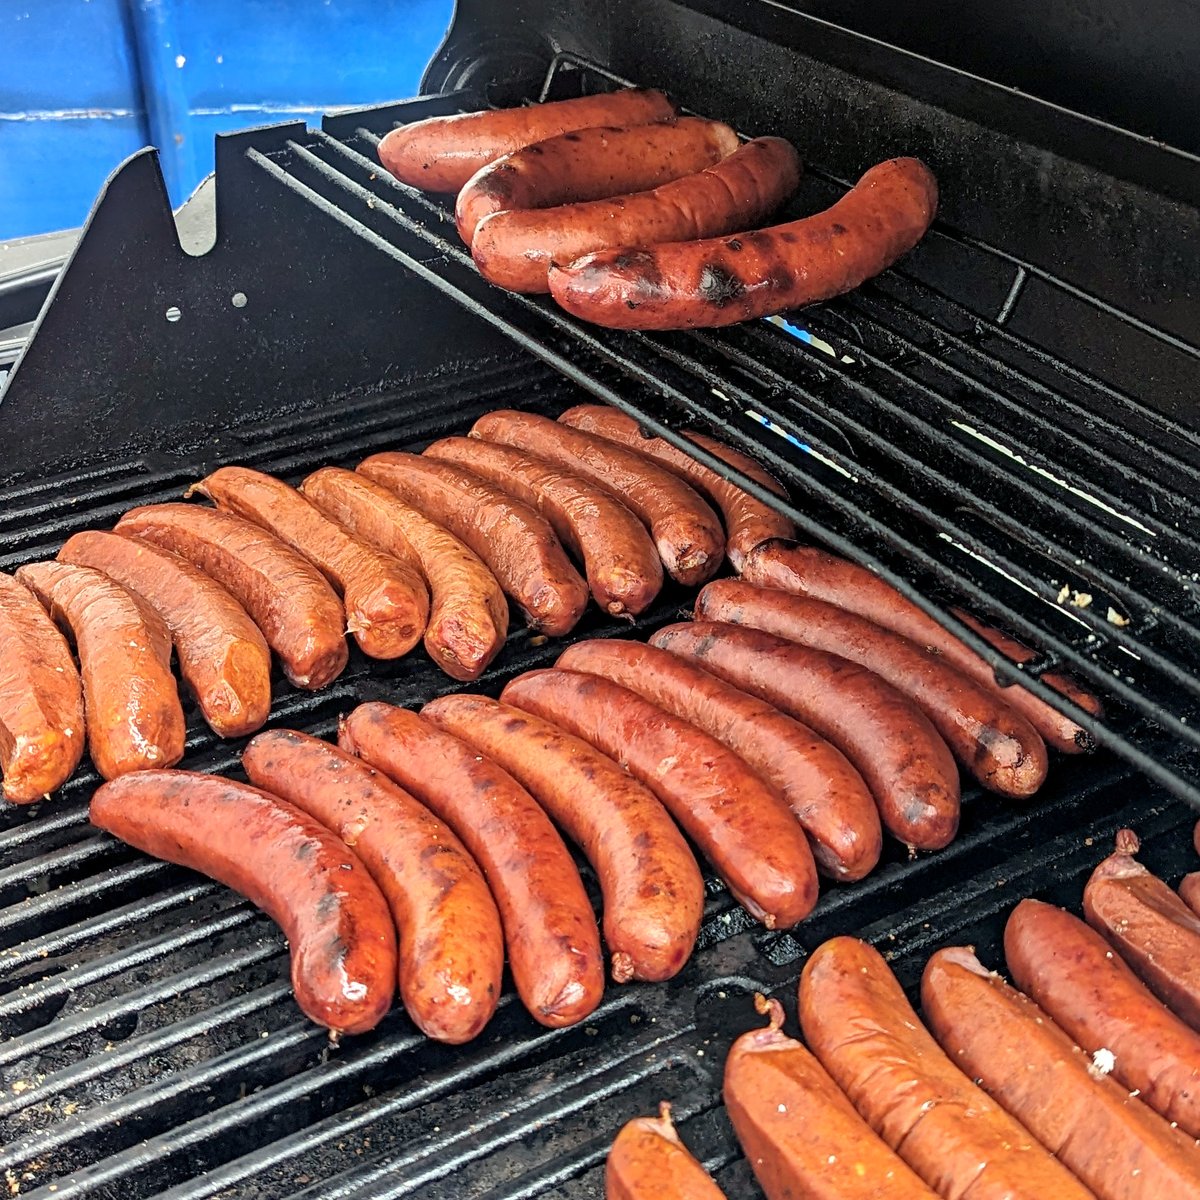 DeWalt Day isn't the only thing going on at #KMSTools #Coquitlam today! The #BBQ is loaded, and the air smells delicious!!
Come on down for lunch on us, and support #YouthUnlimited in their work with at-risk youth locally, and abroad!
🌭🛠️
#SupportYouth